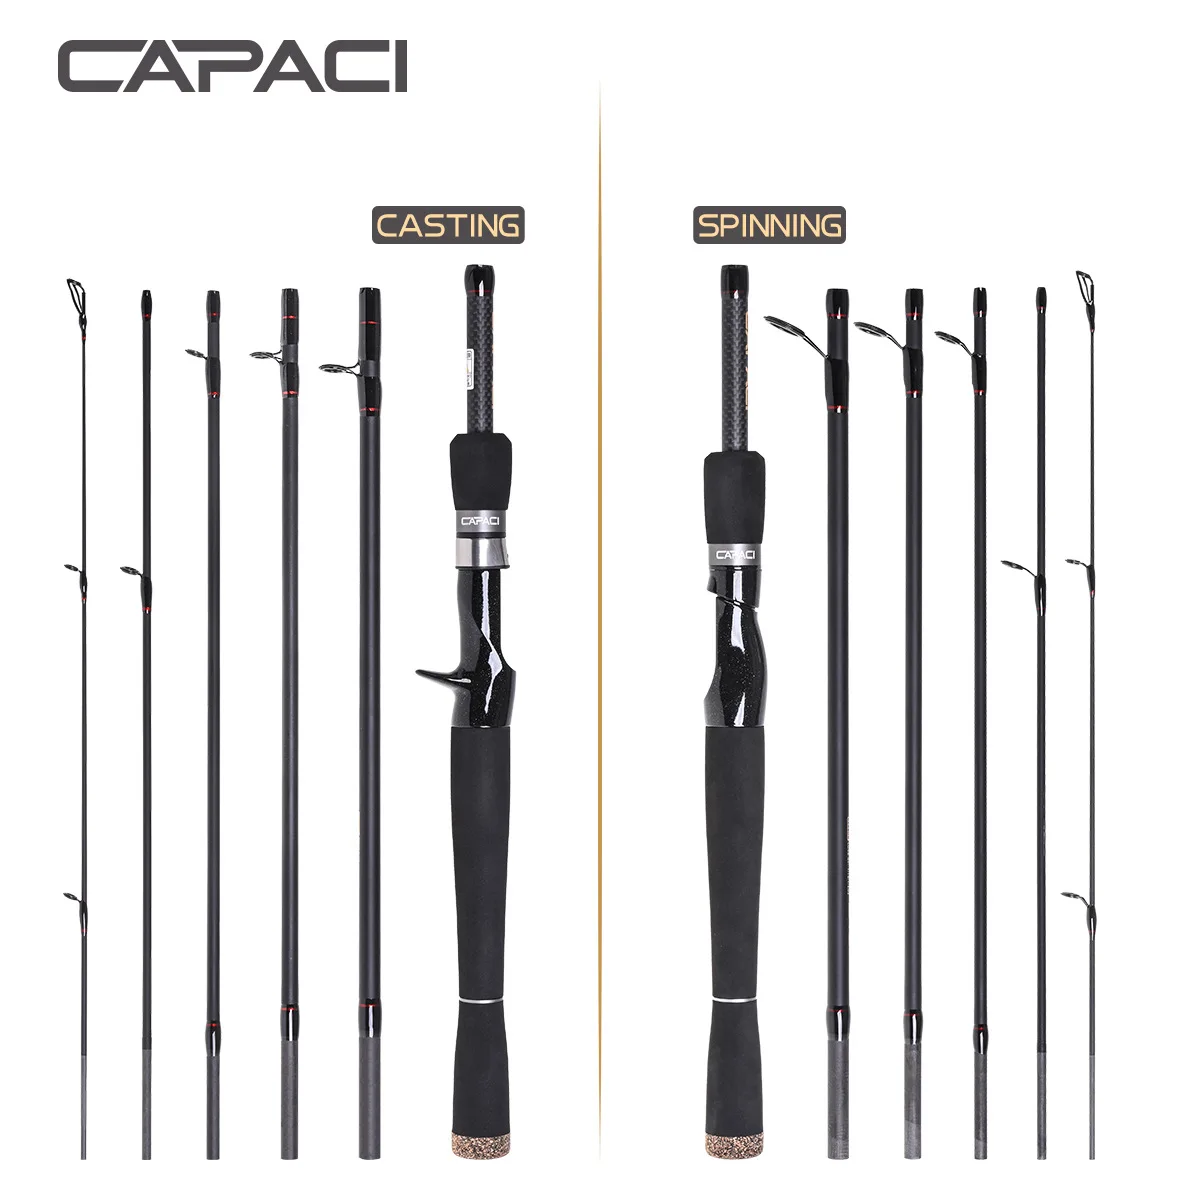 Goture Warrior Fishing Rod 2.7m 2.4m 2.28m 2.13m 4 Pieces Carbon Fiber Spinning  Casting Travel Rods With Portable Bag - Fishing Rods - AliExpress